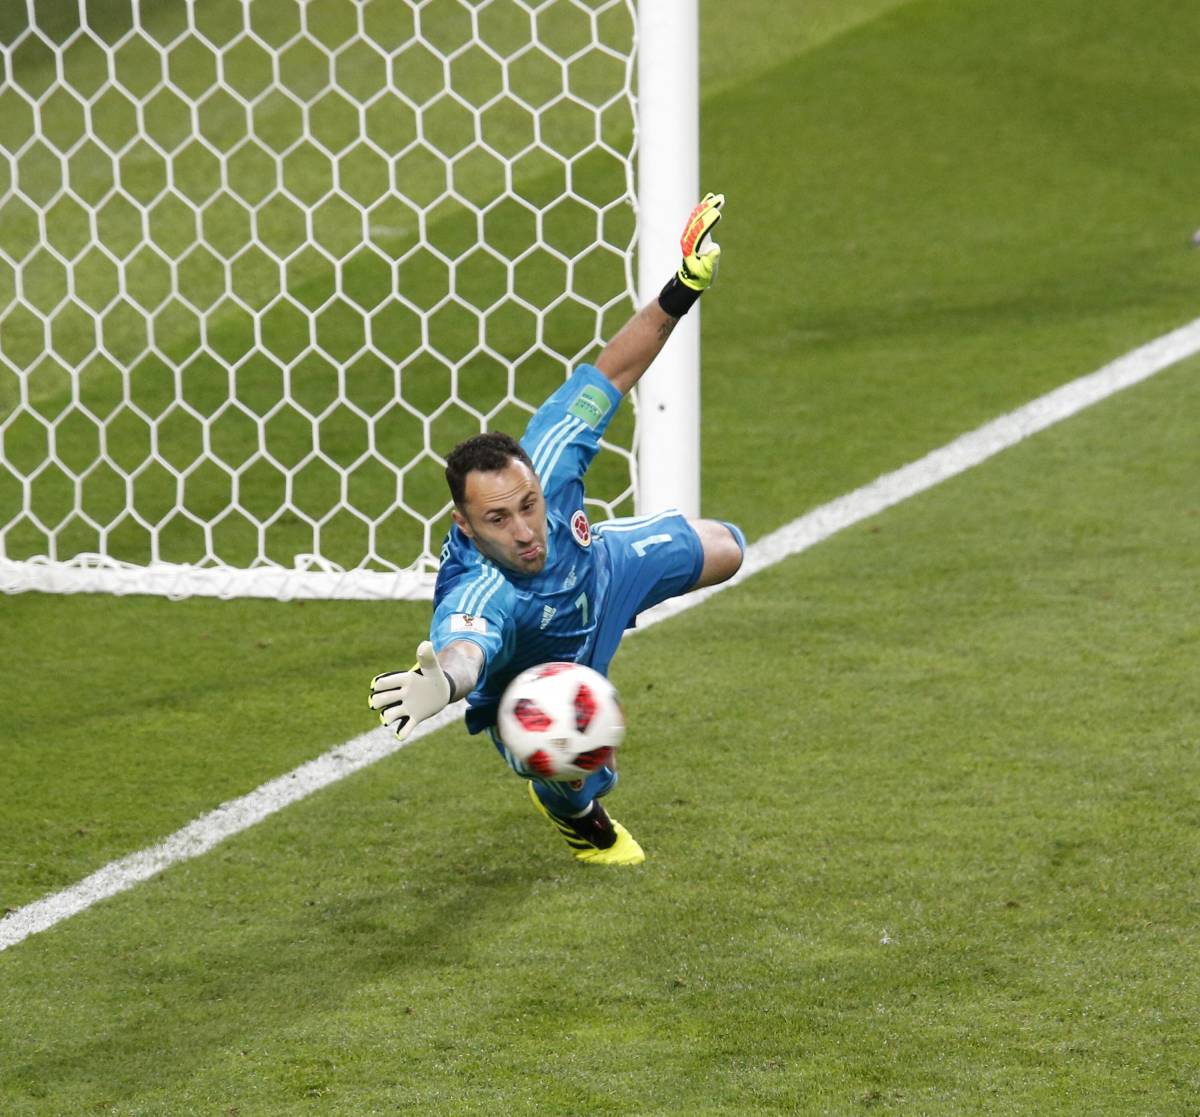 Colombia goalkeeper David Ospina pictured in action at the 2018 World Cup